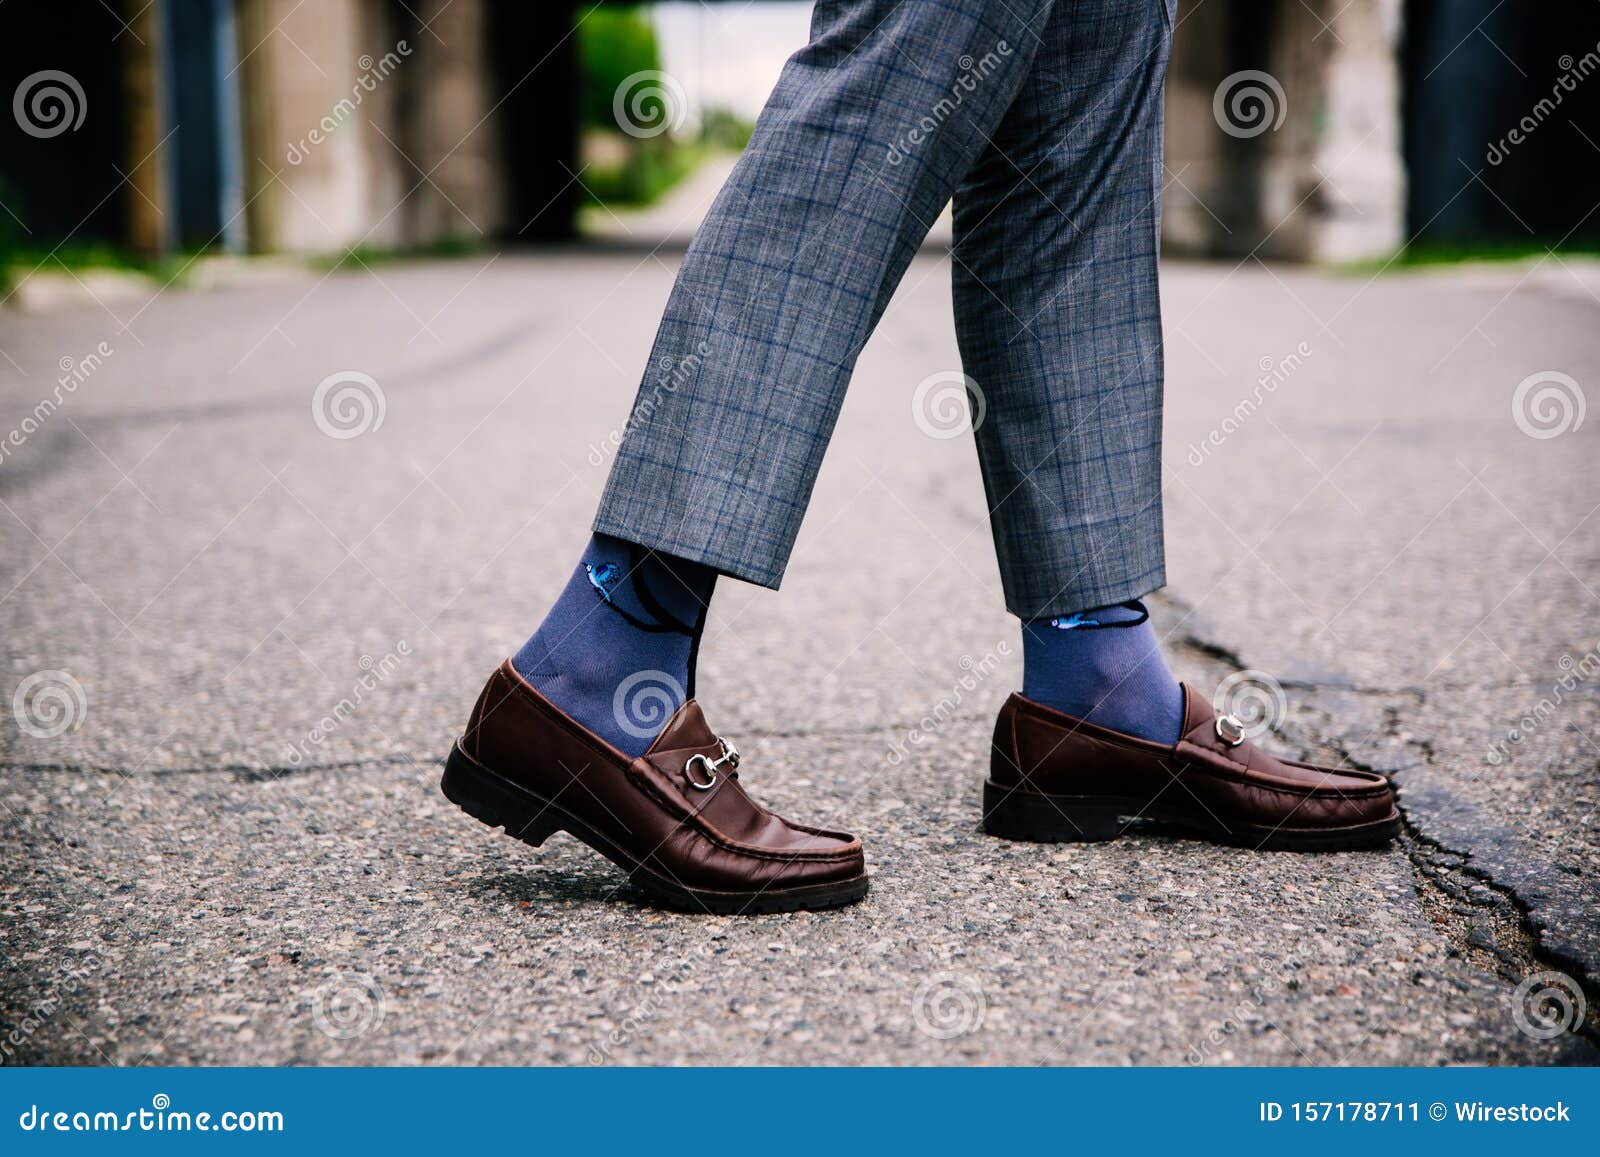 Navy Blue Trousers Ultimate Shoe Coordination Guide 